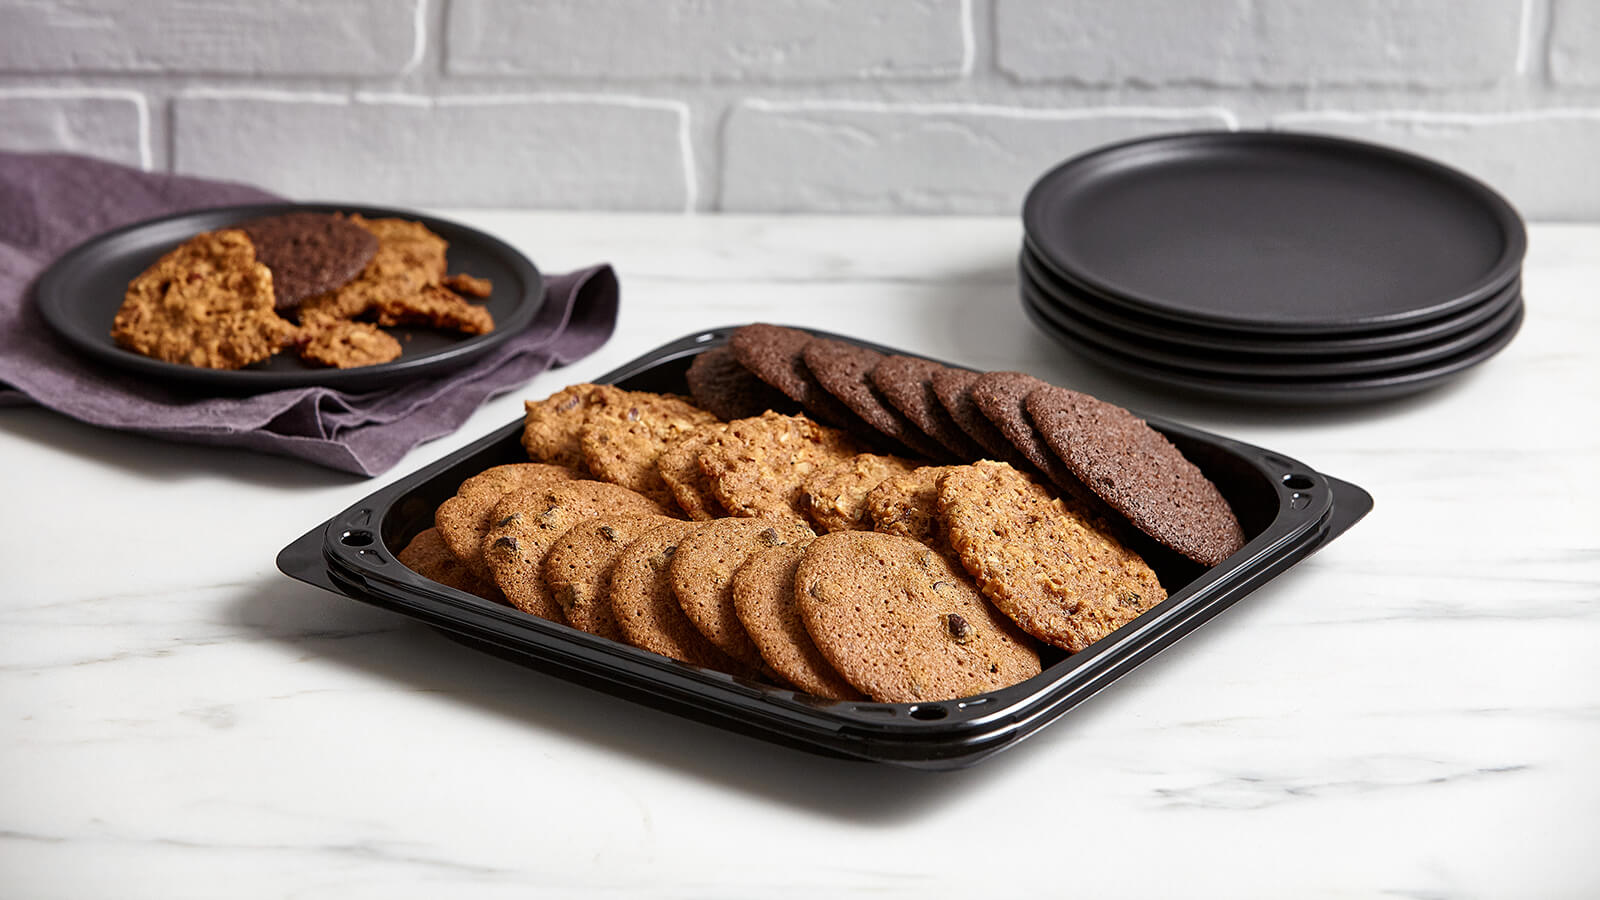 Fresh Baked Cookie Tray - Miller's Food Market